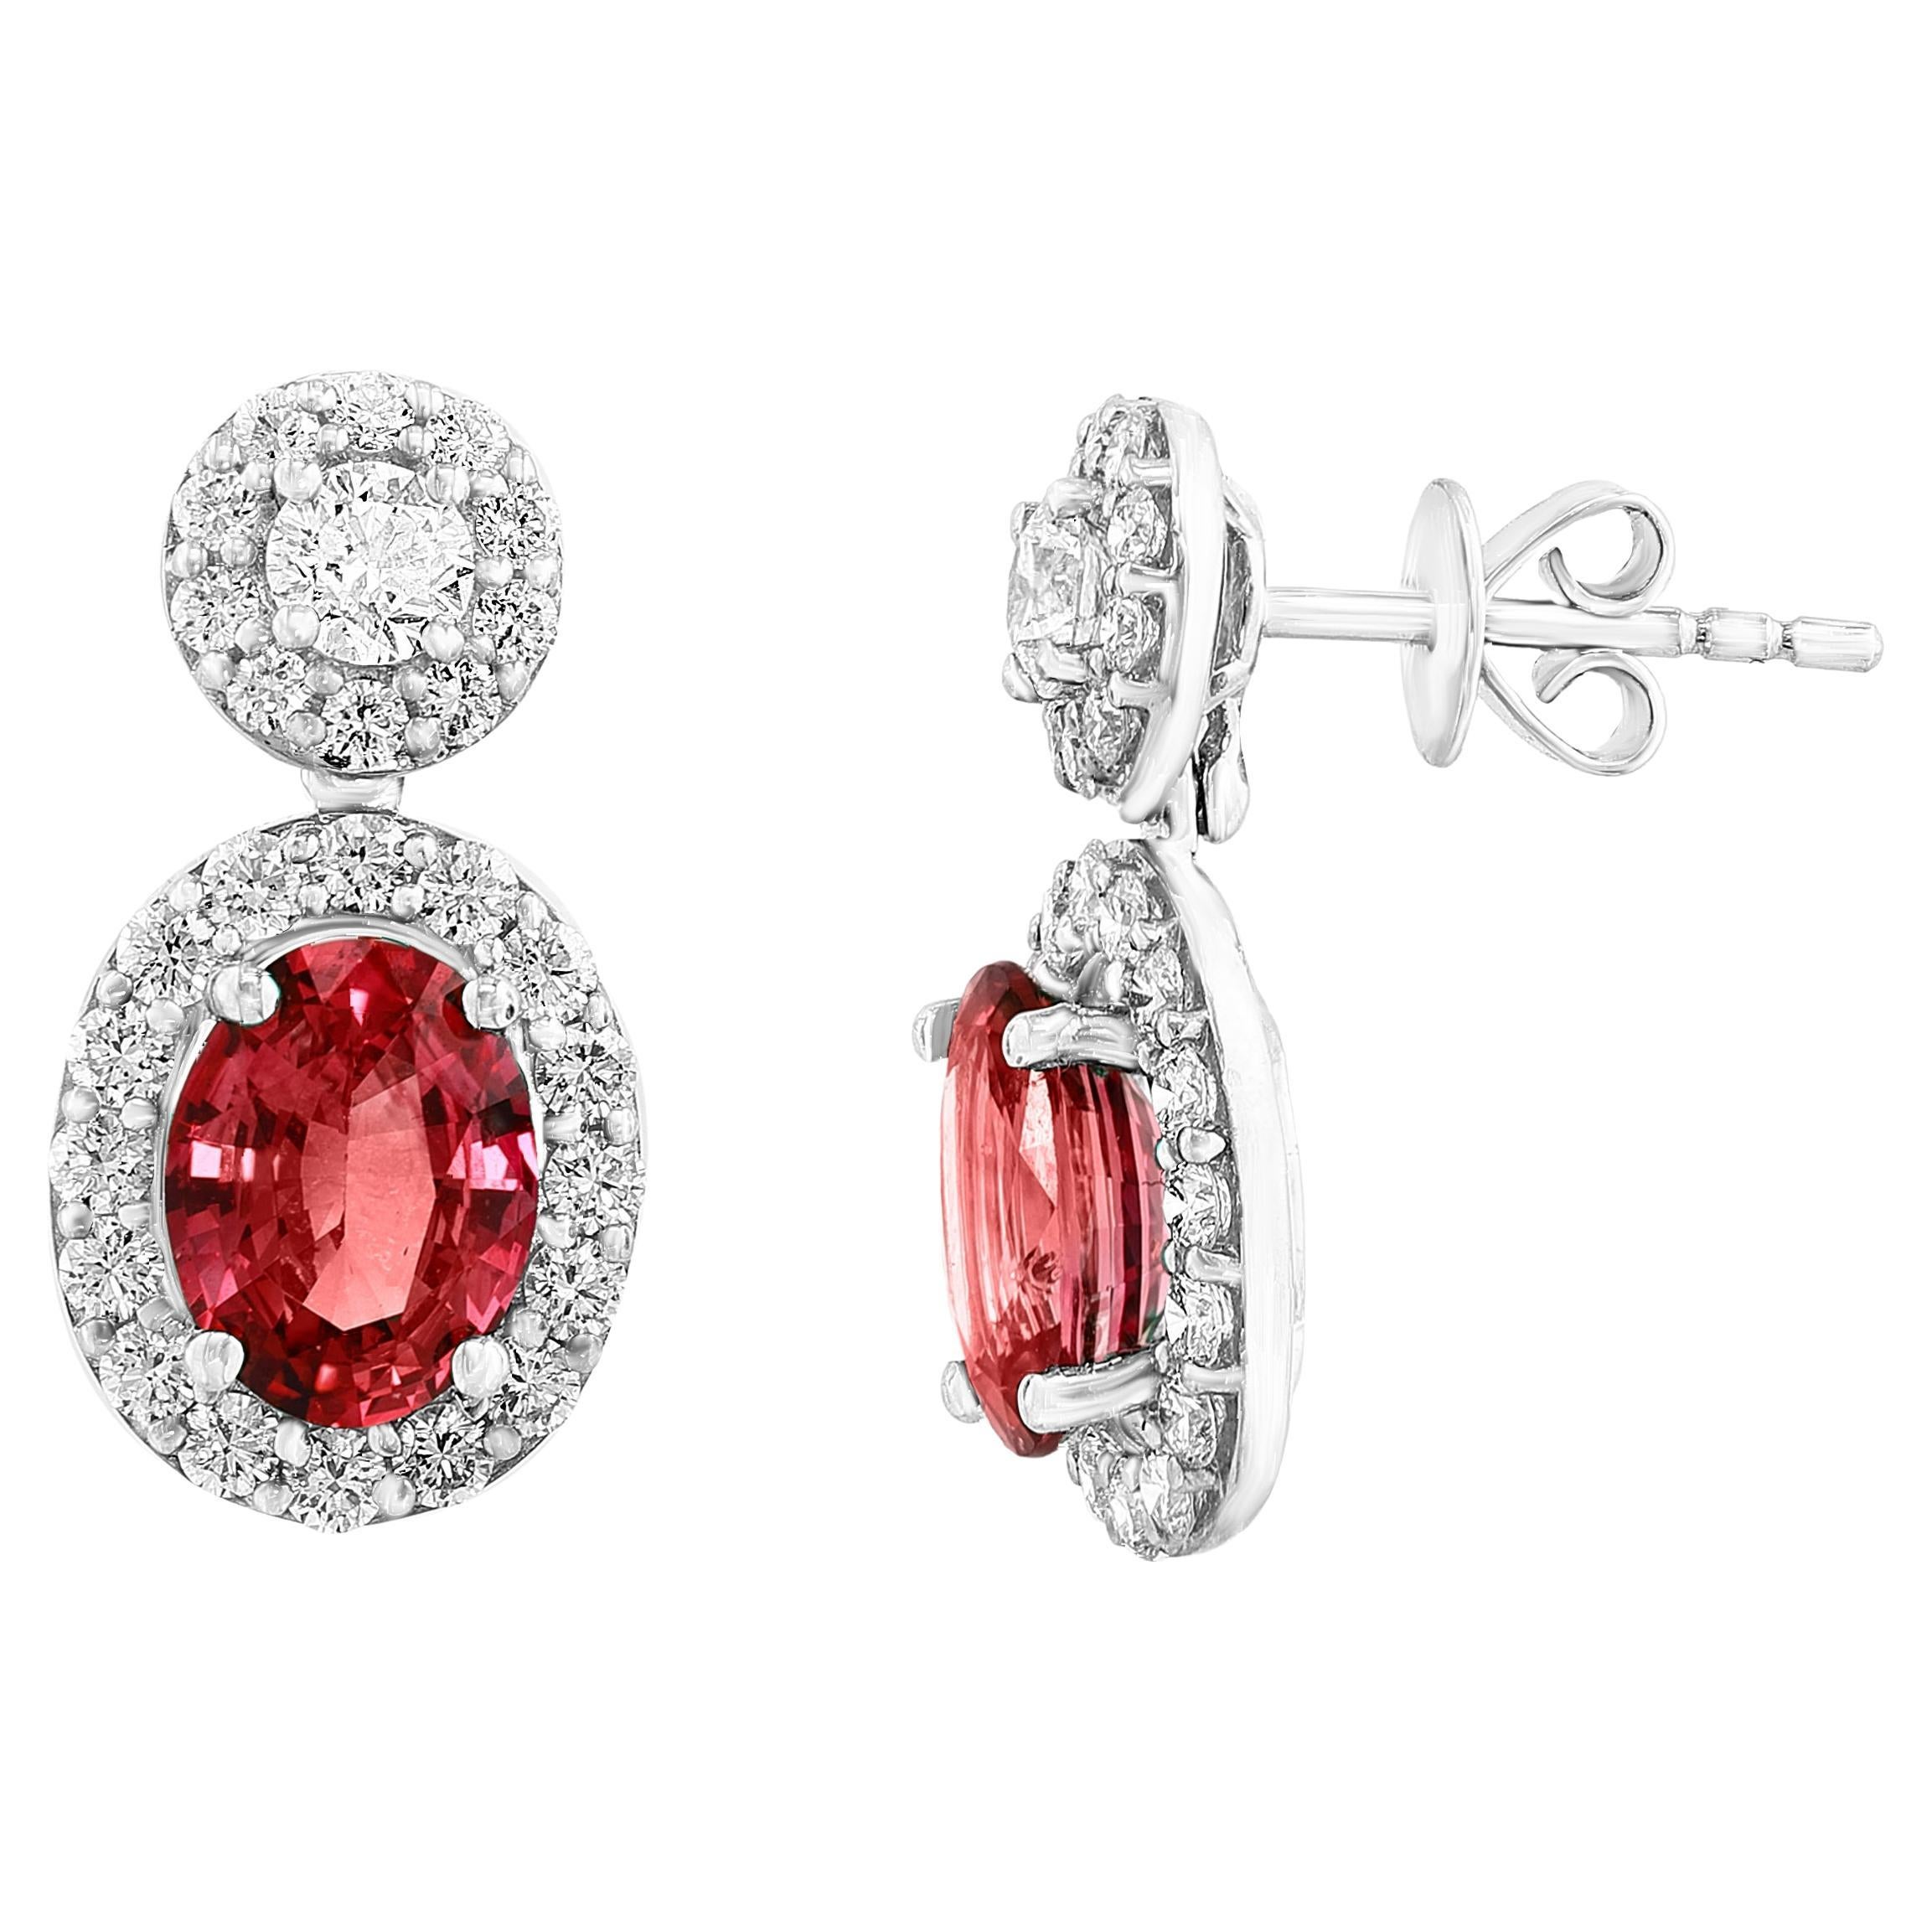 1.29 Carat of Oval Shape Ruby and Diamond Drop Earrings in 18K White Gold